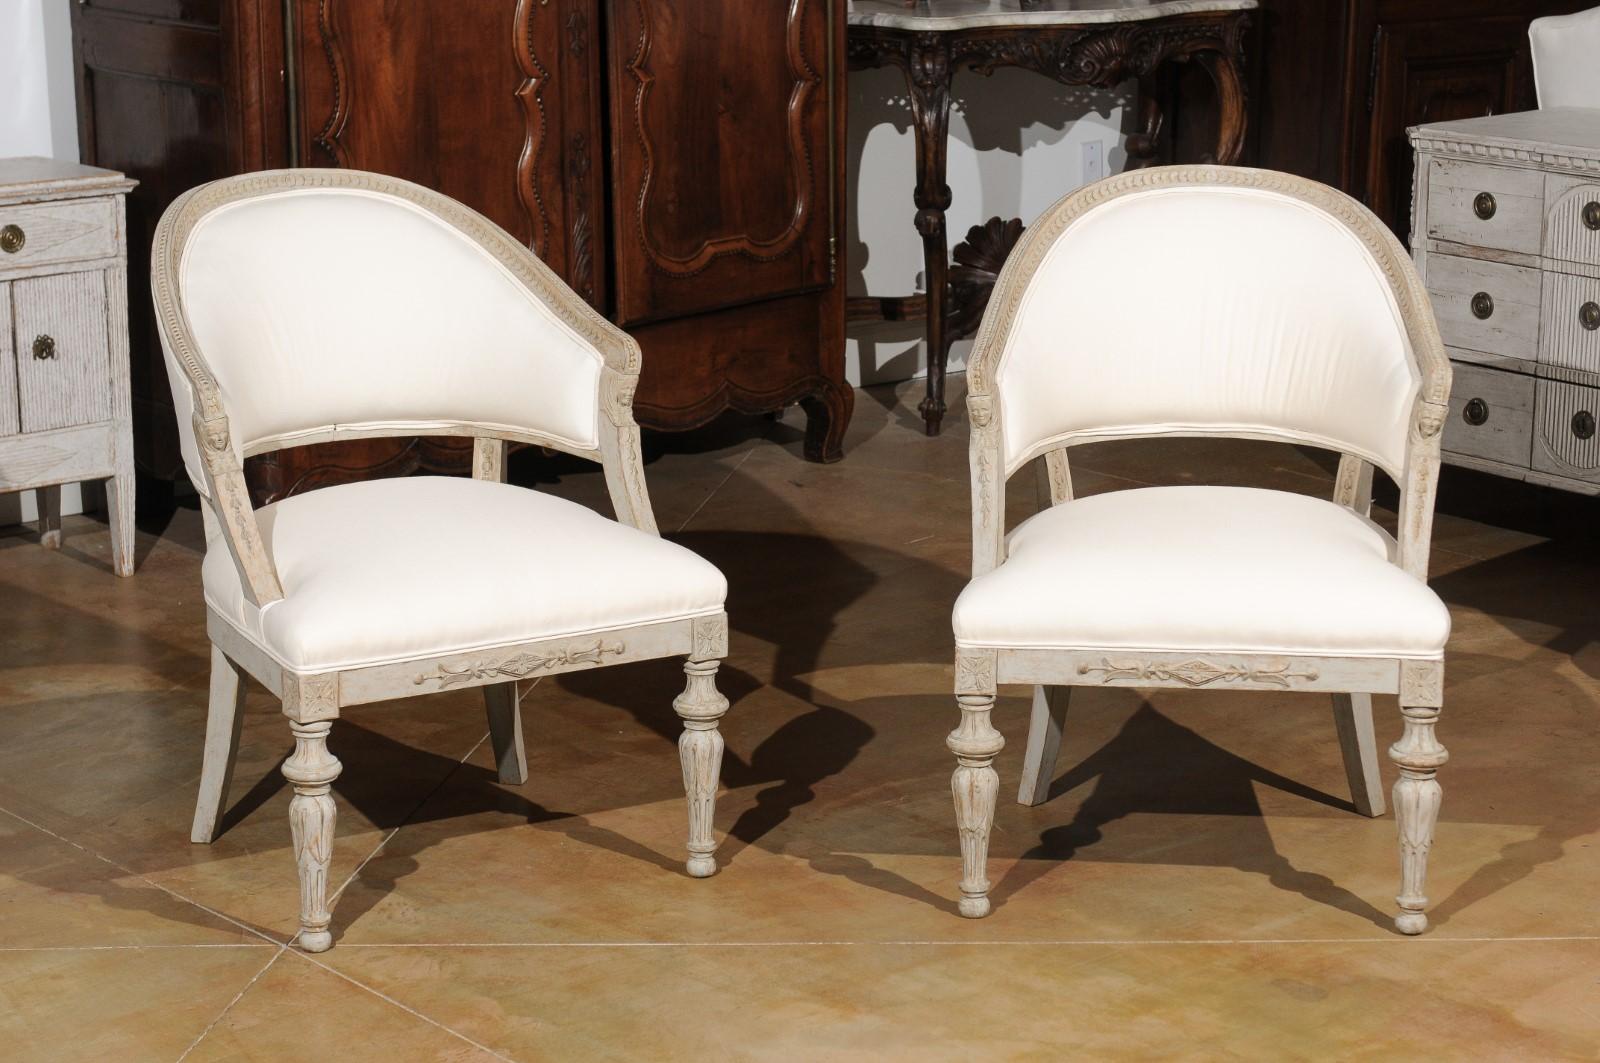 A pair of Swedish 19th century neoclassical style barrel-back chairs from the 19th century, with classical heads, foliage and new upholstery. Born in Sweden during the 19th century, each of this pair of exquisite neoclassical style armchairs